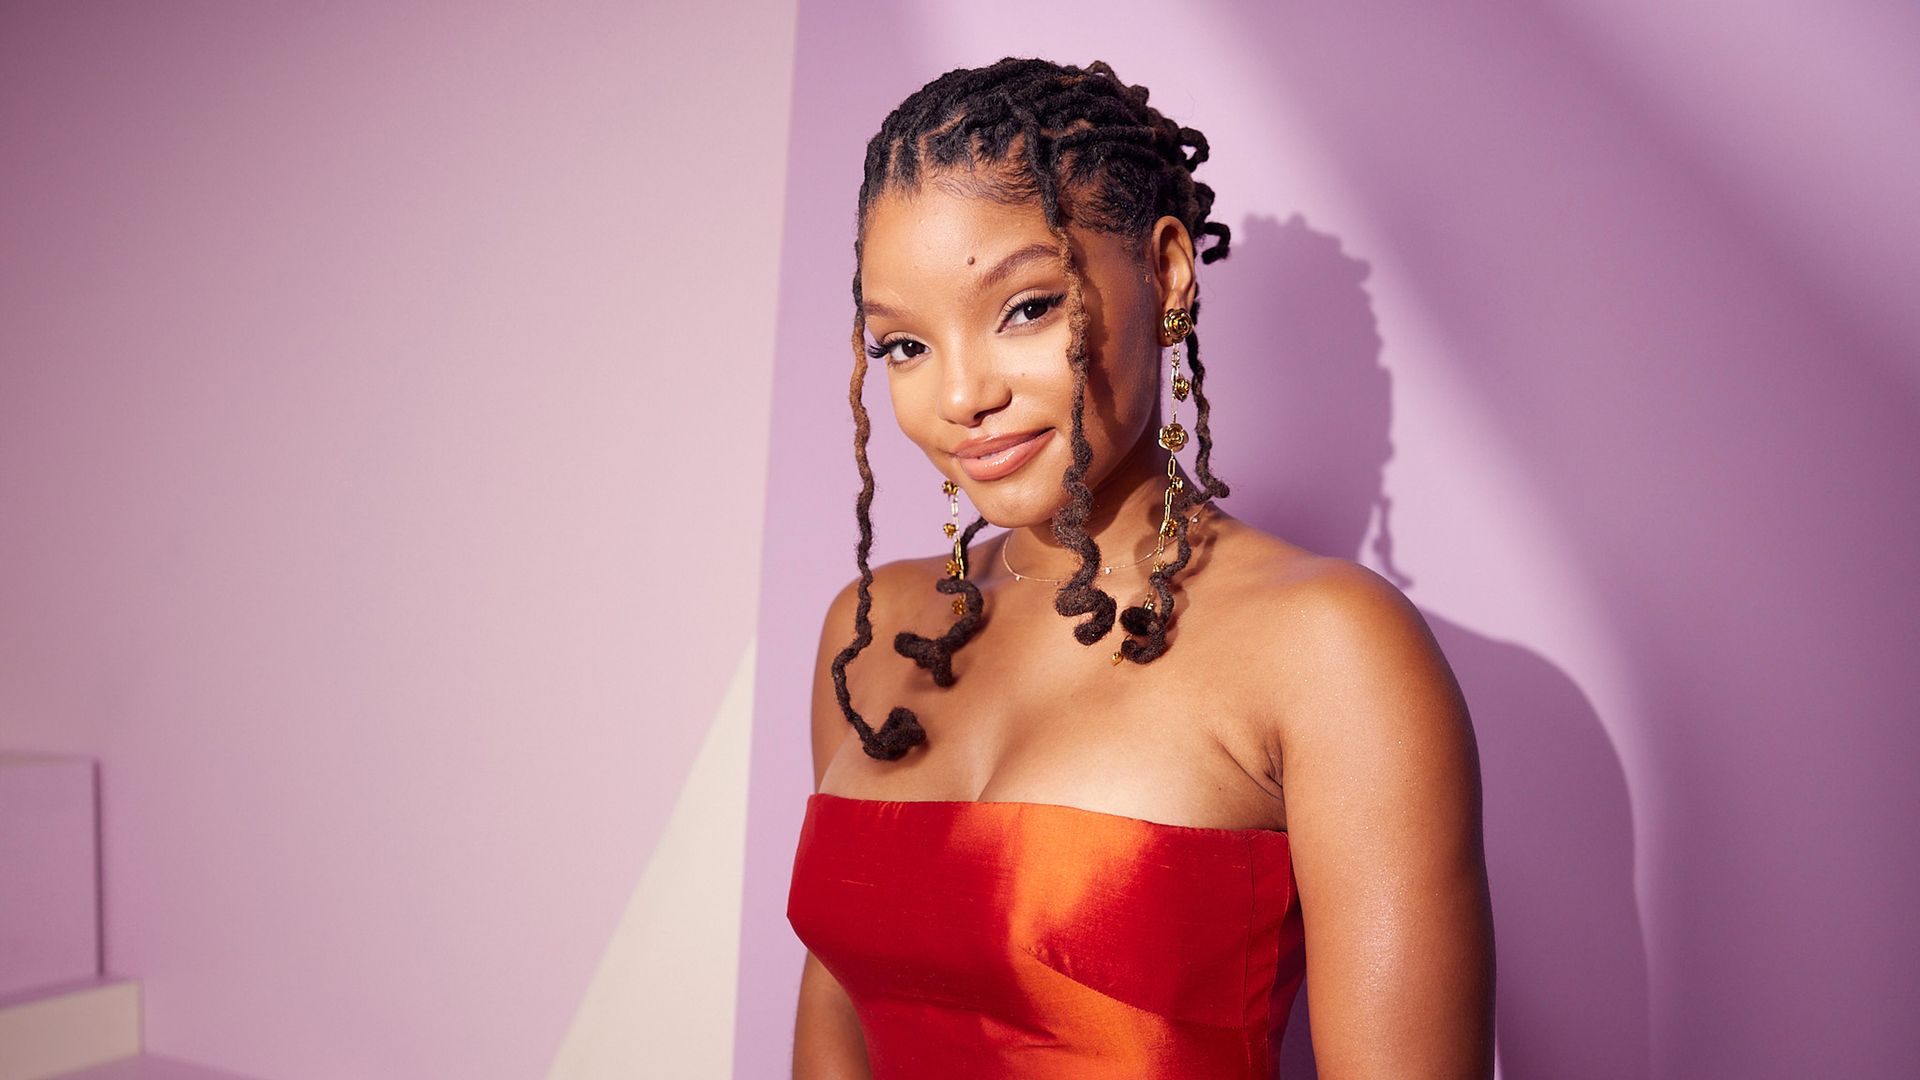 Halle Bailey poses at the IMDb Official Portrait Studio during D23 2022 at Anaheim Convention Center on September 09, 2022 in Anaheim, California